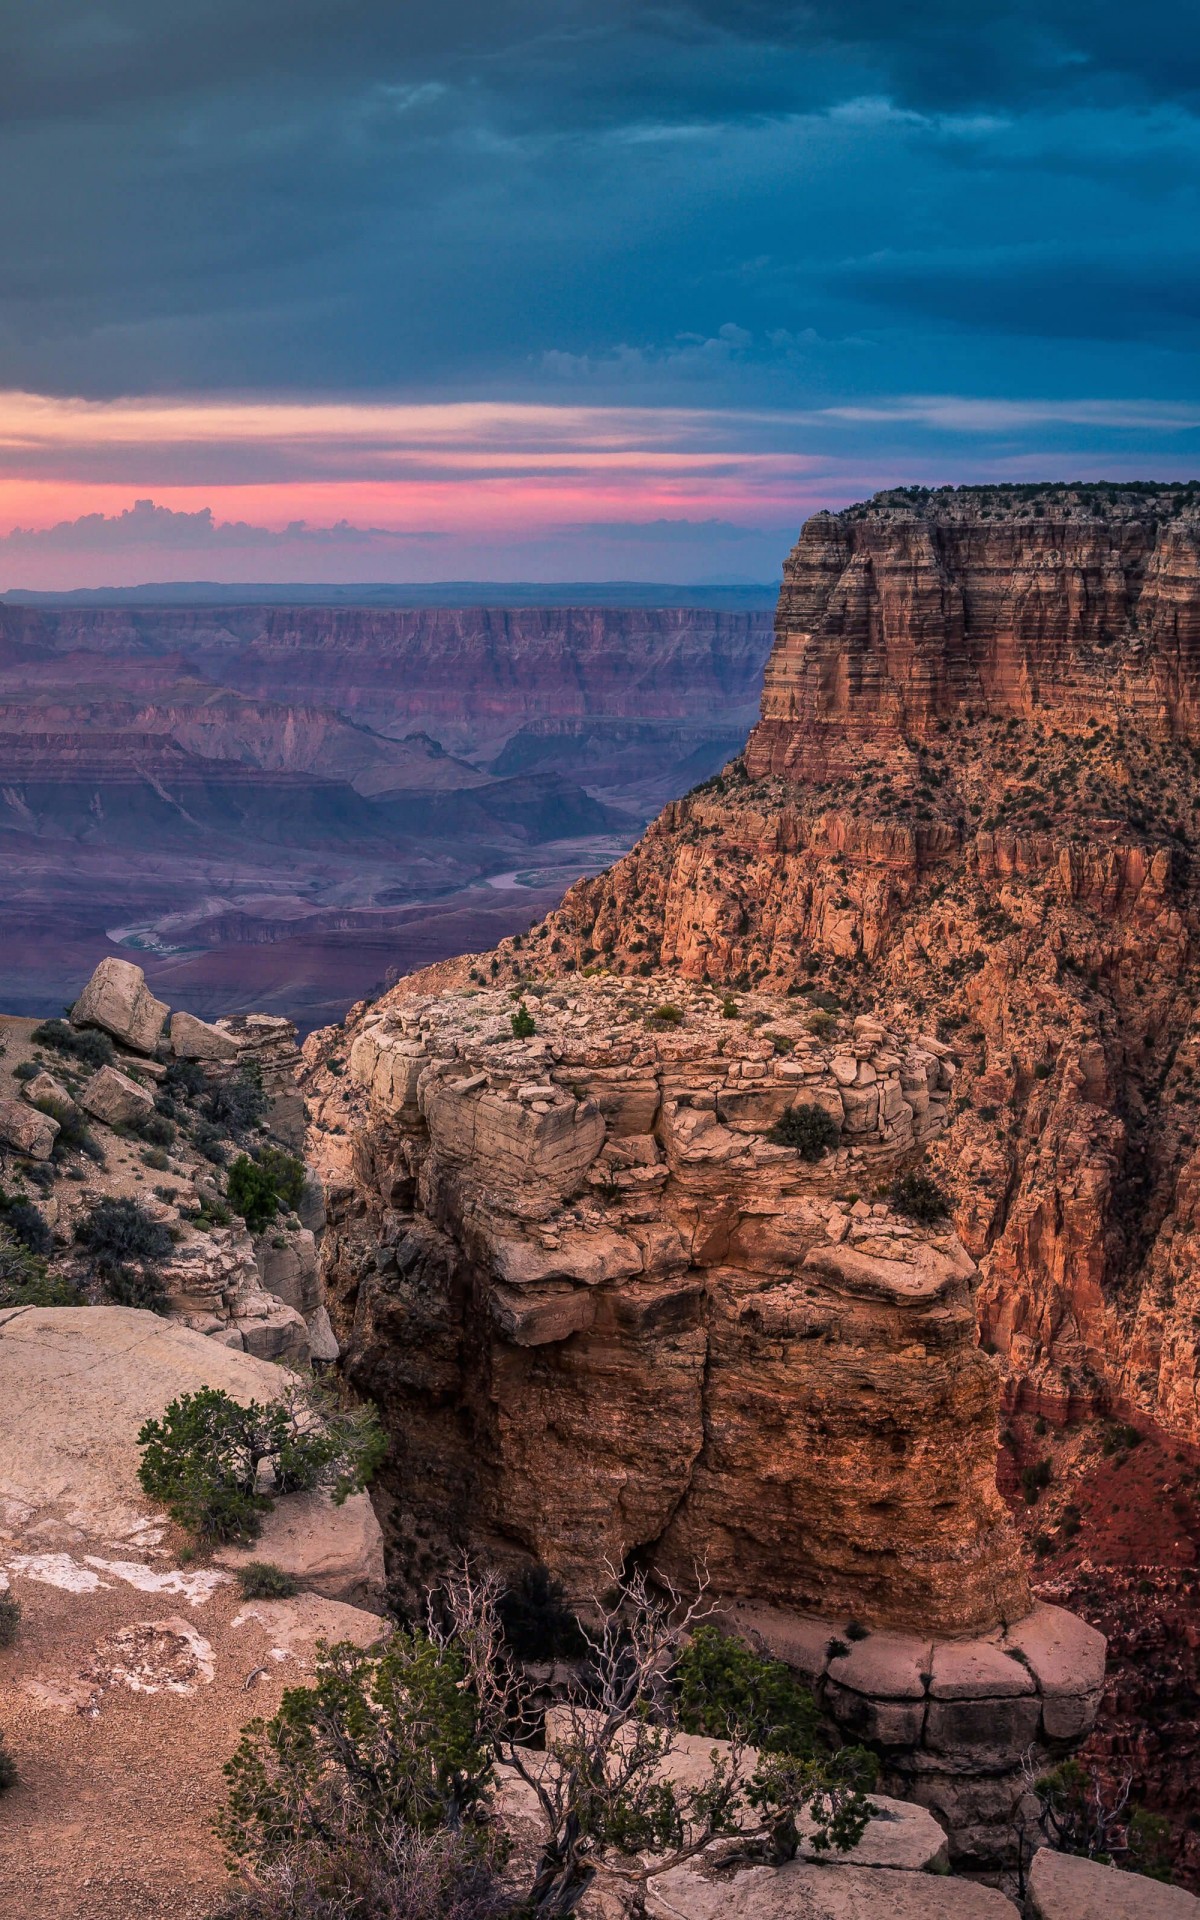 Sunset At The Grand Canyon Wallpaper for Amazon Kindle Fire HDX